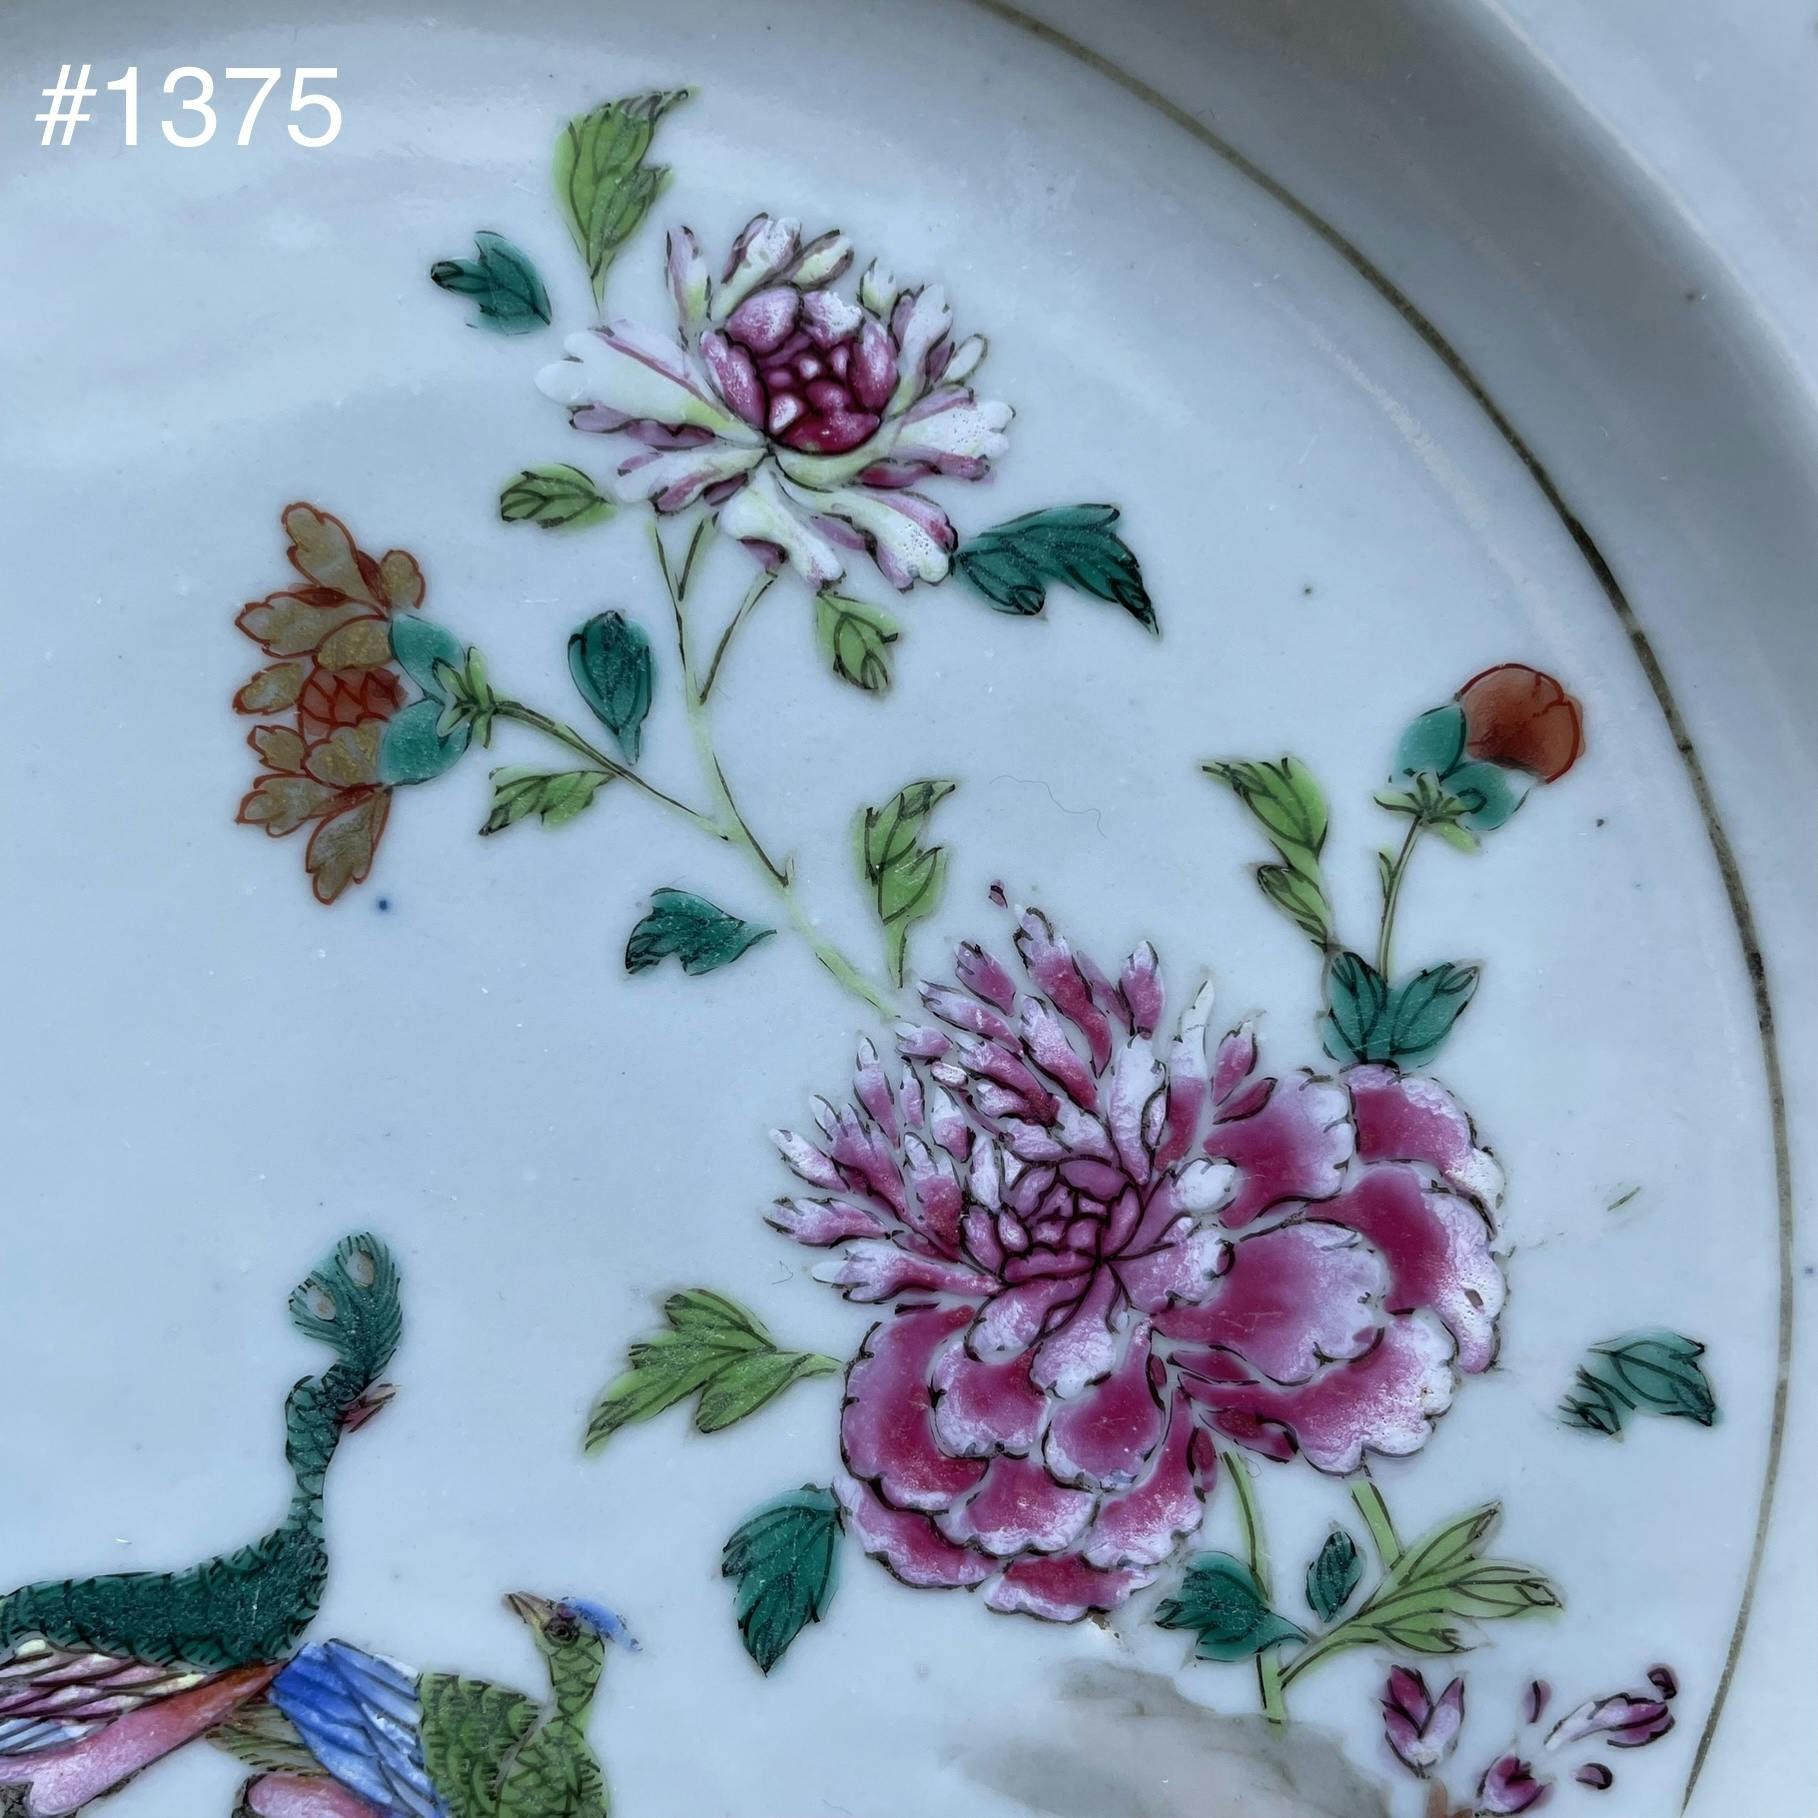 A pair of Antique Chinese export famille rose plates Qianlong #1360 & 1375